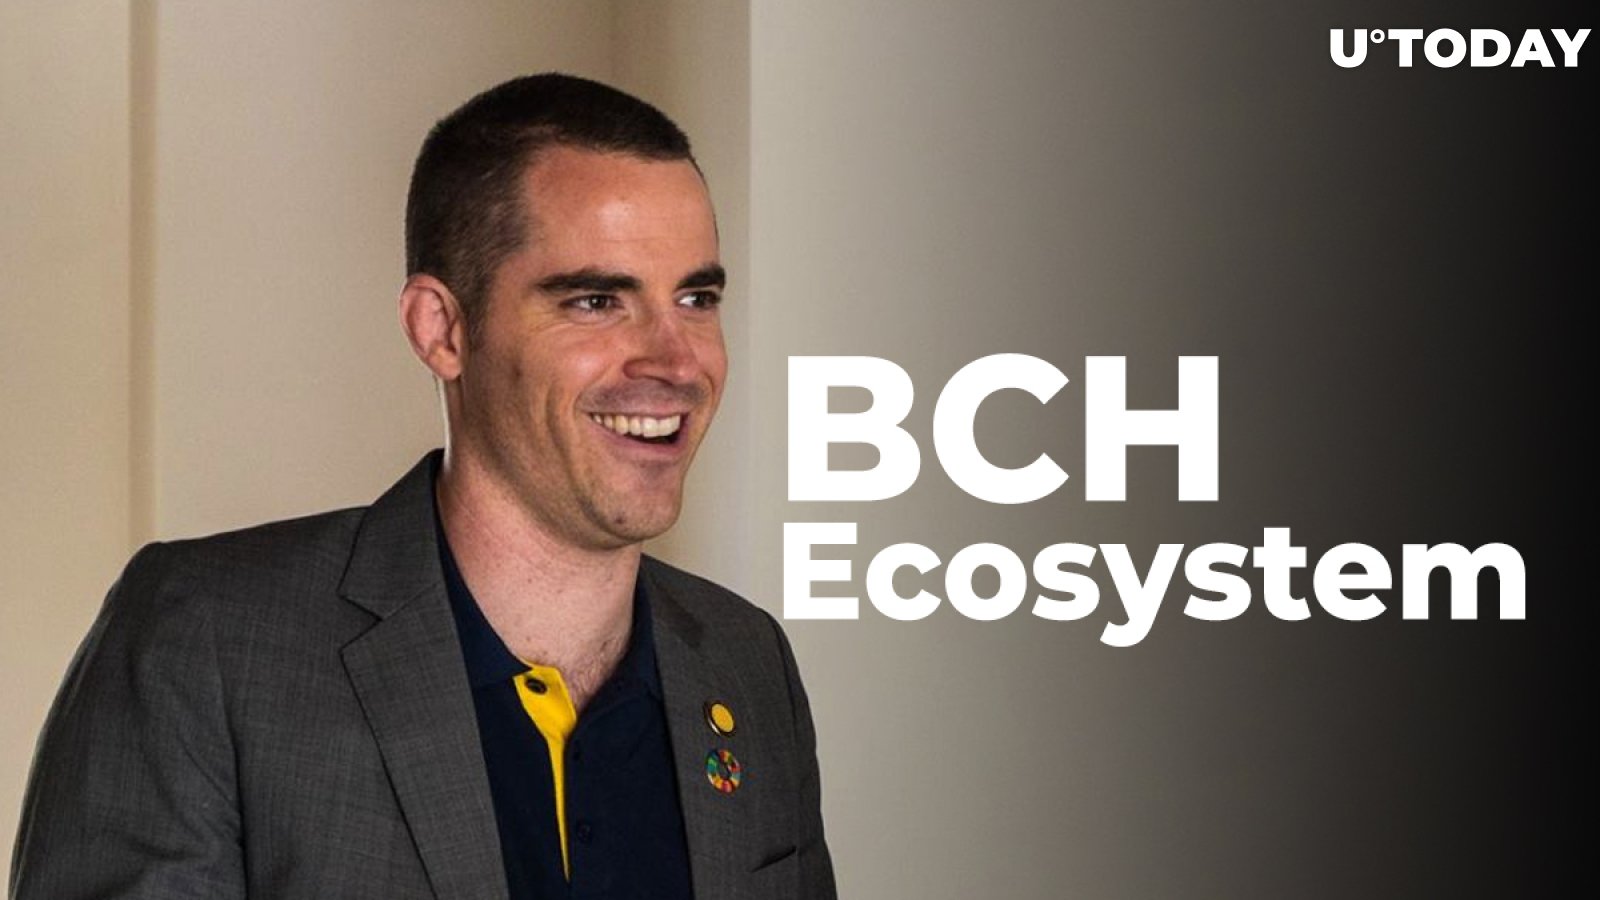 "Bitcoin Jesus" Roger Ver to Spend $200M Fund for Bitcoin Cash Ecosystem